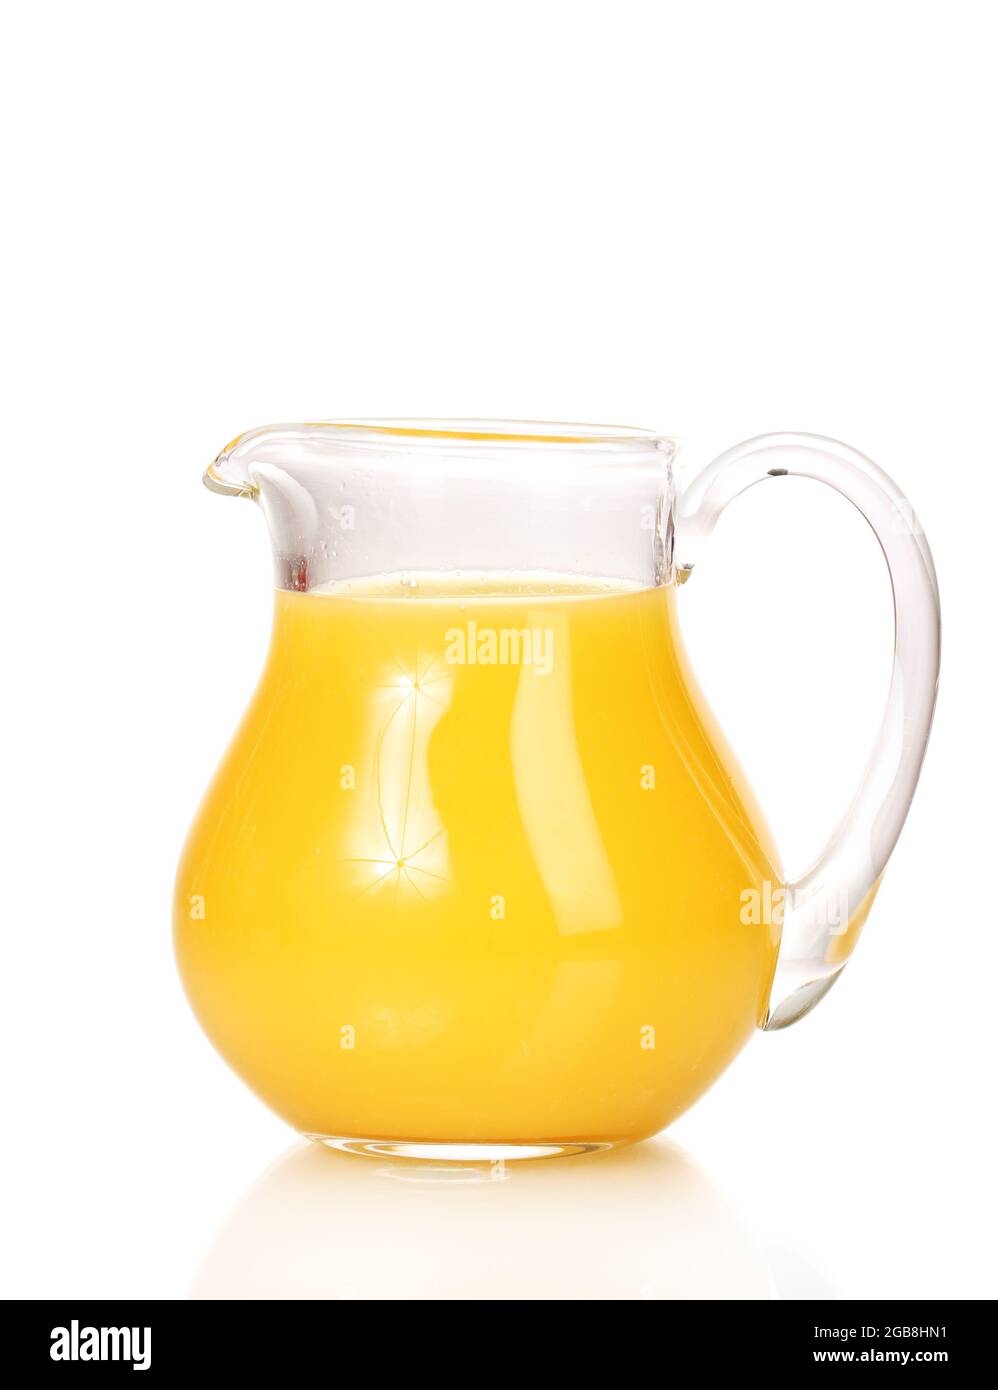 https://c8.alamy.com/comp/2GB8HN1/tropical-juice-in-glass-pitcher-isolated-on-white-2GB8HN1.jpg